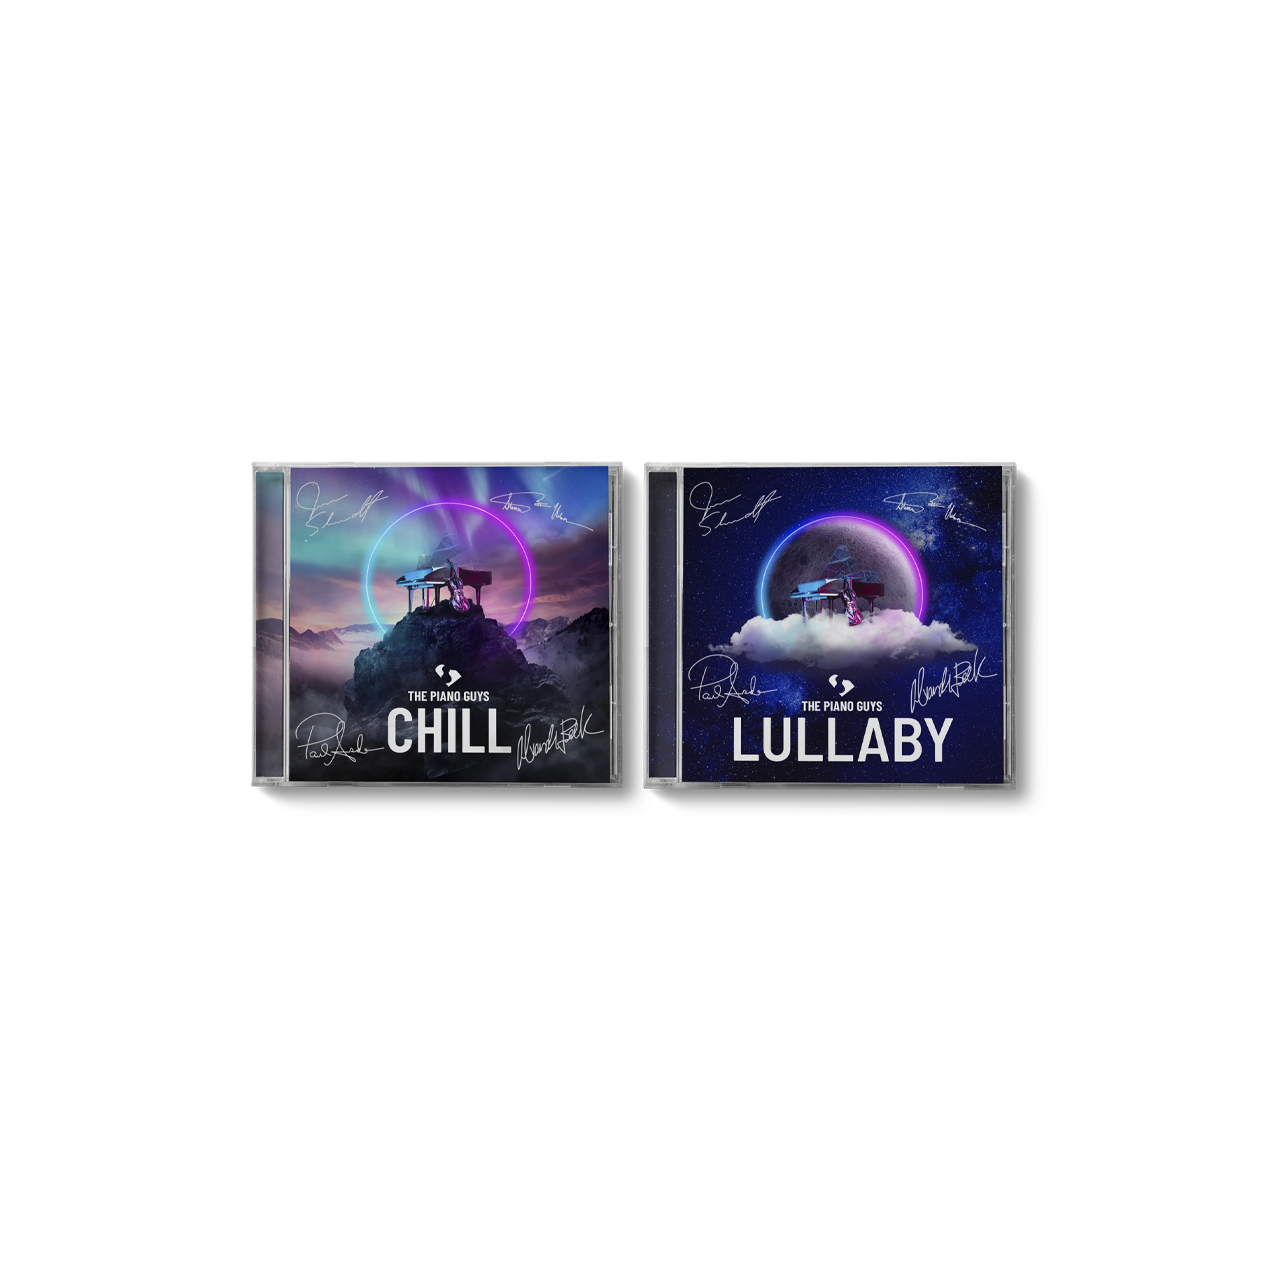 The Piano Guys "CHILL" & "LULLABY" Bundle